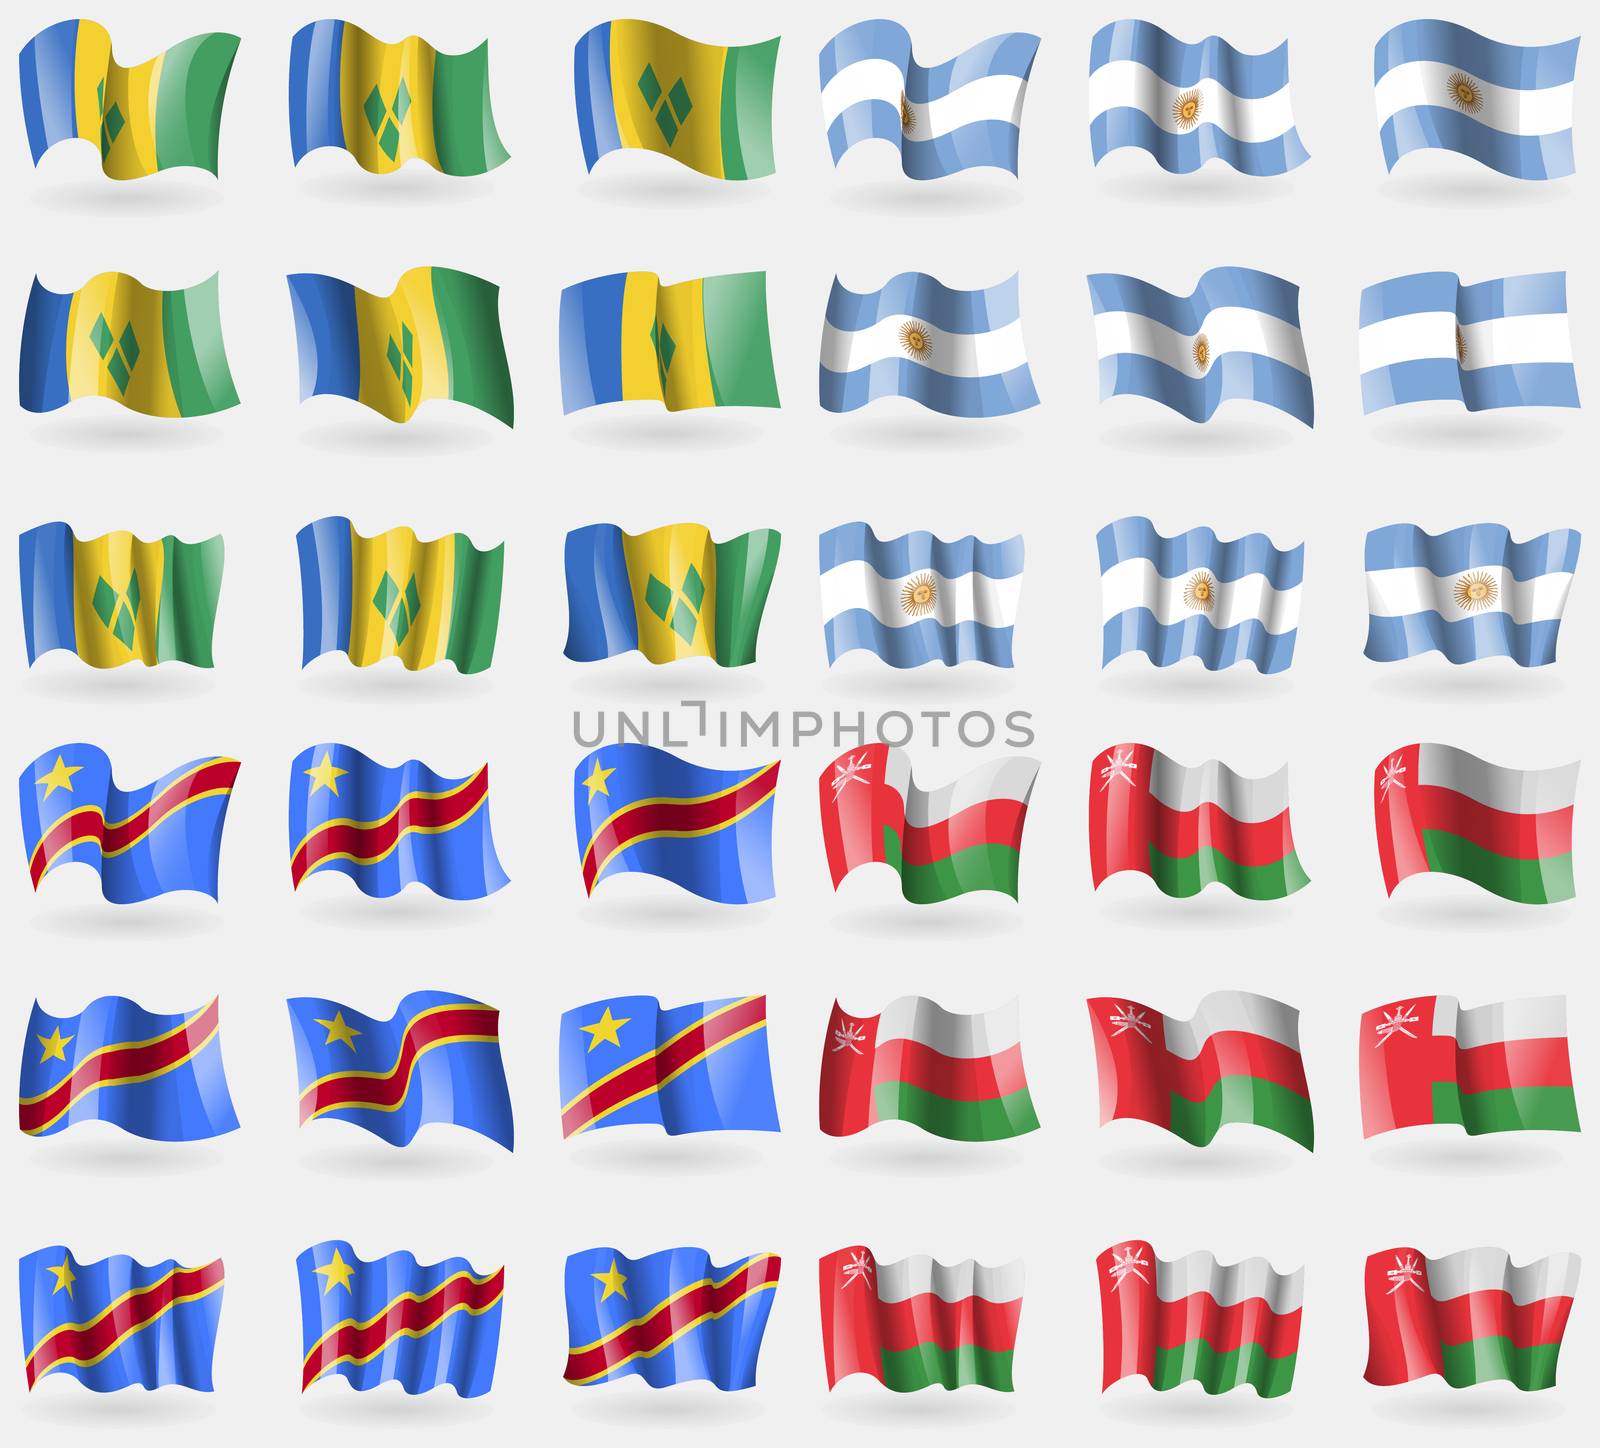 Saint Vincent and Grenadines, Argentina, Congo Democratic Republic, Oman. Set of 36 flags of the countries of the world. illustration